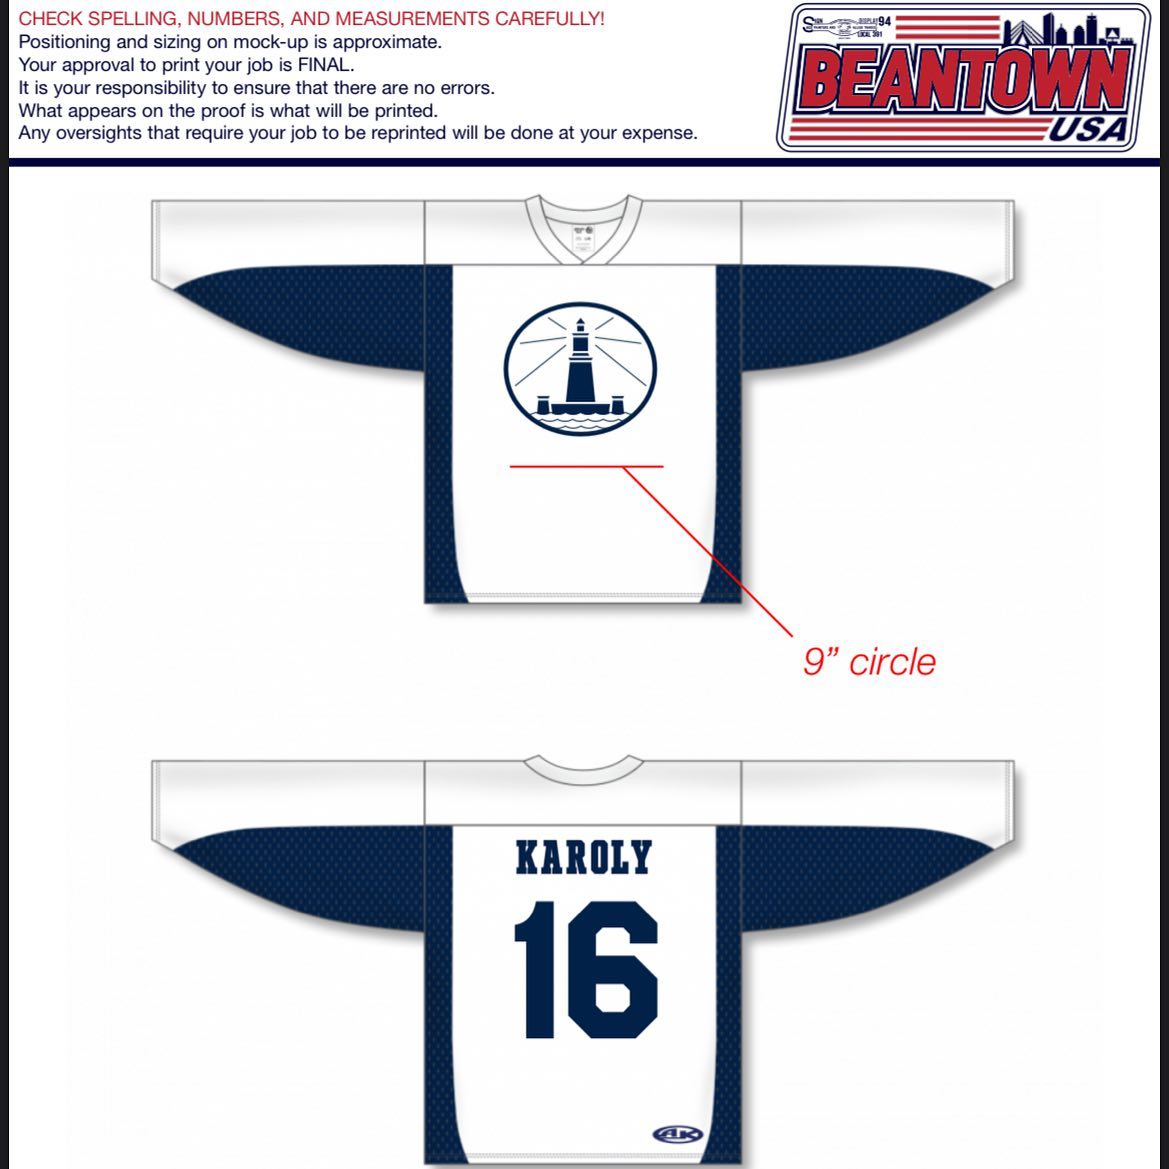 Here’s an example of what an order mock-up looks like! These hockey jerseys are going to be worn on the ice by the Alexandria Real Estate Equities team!